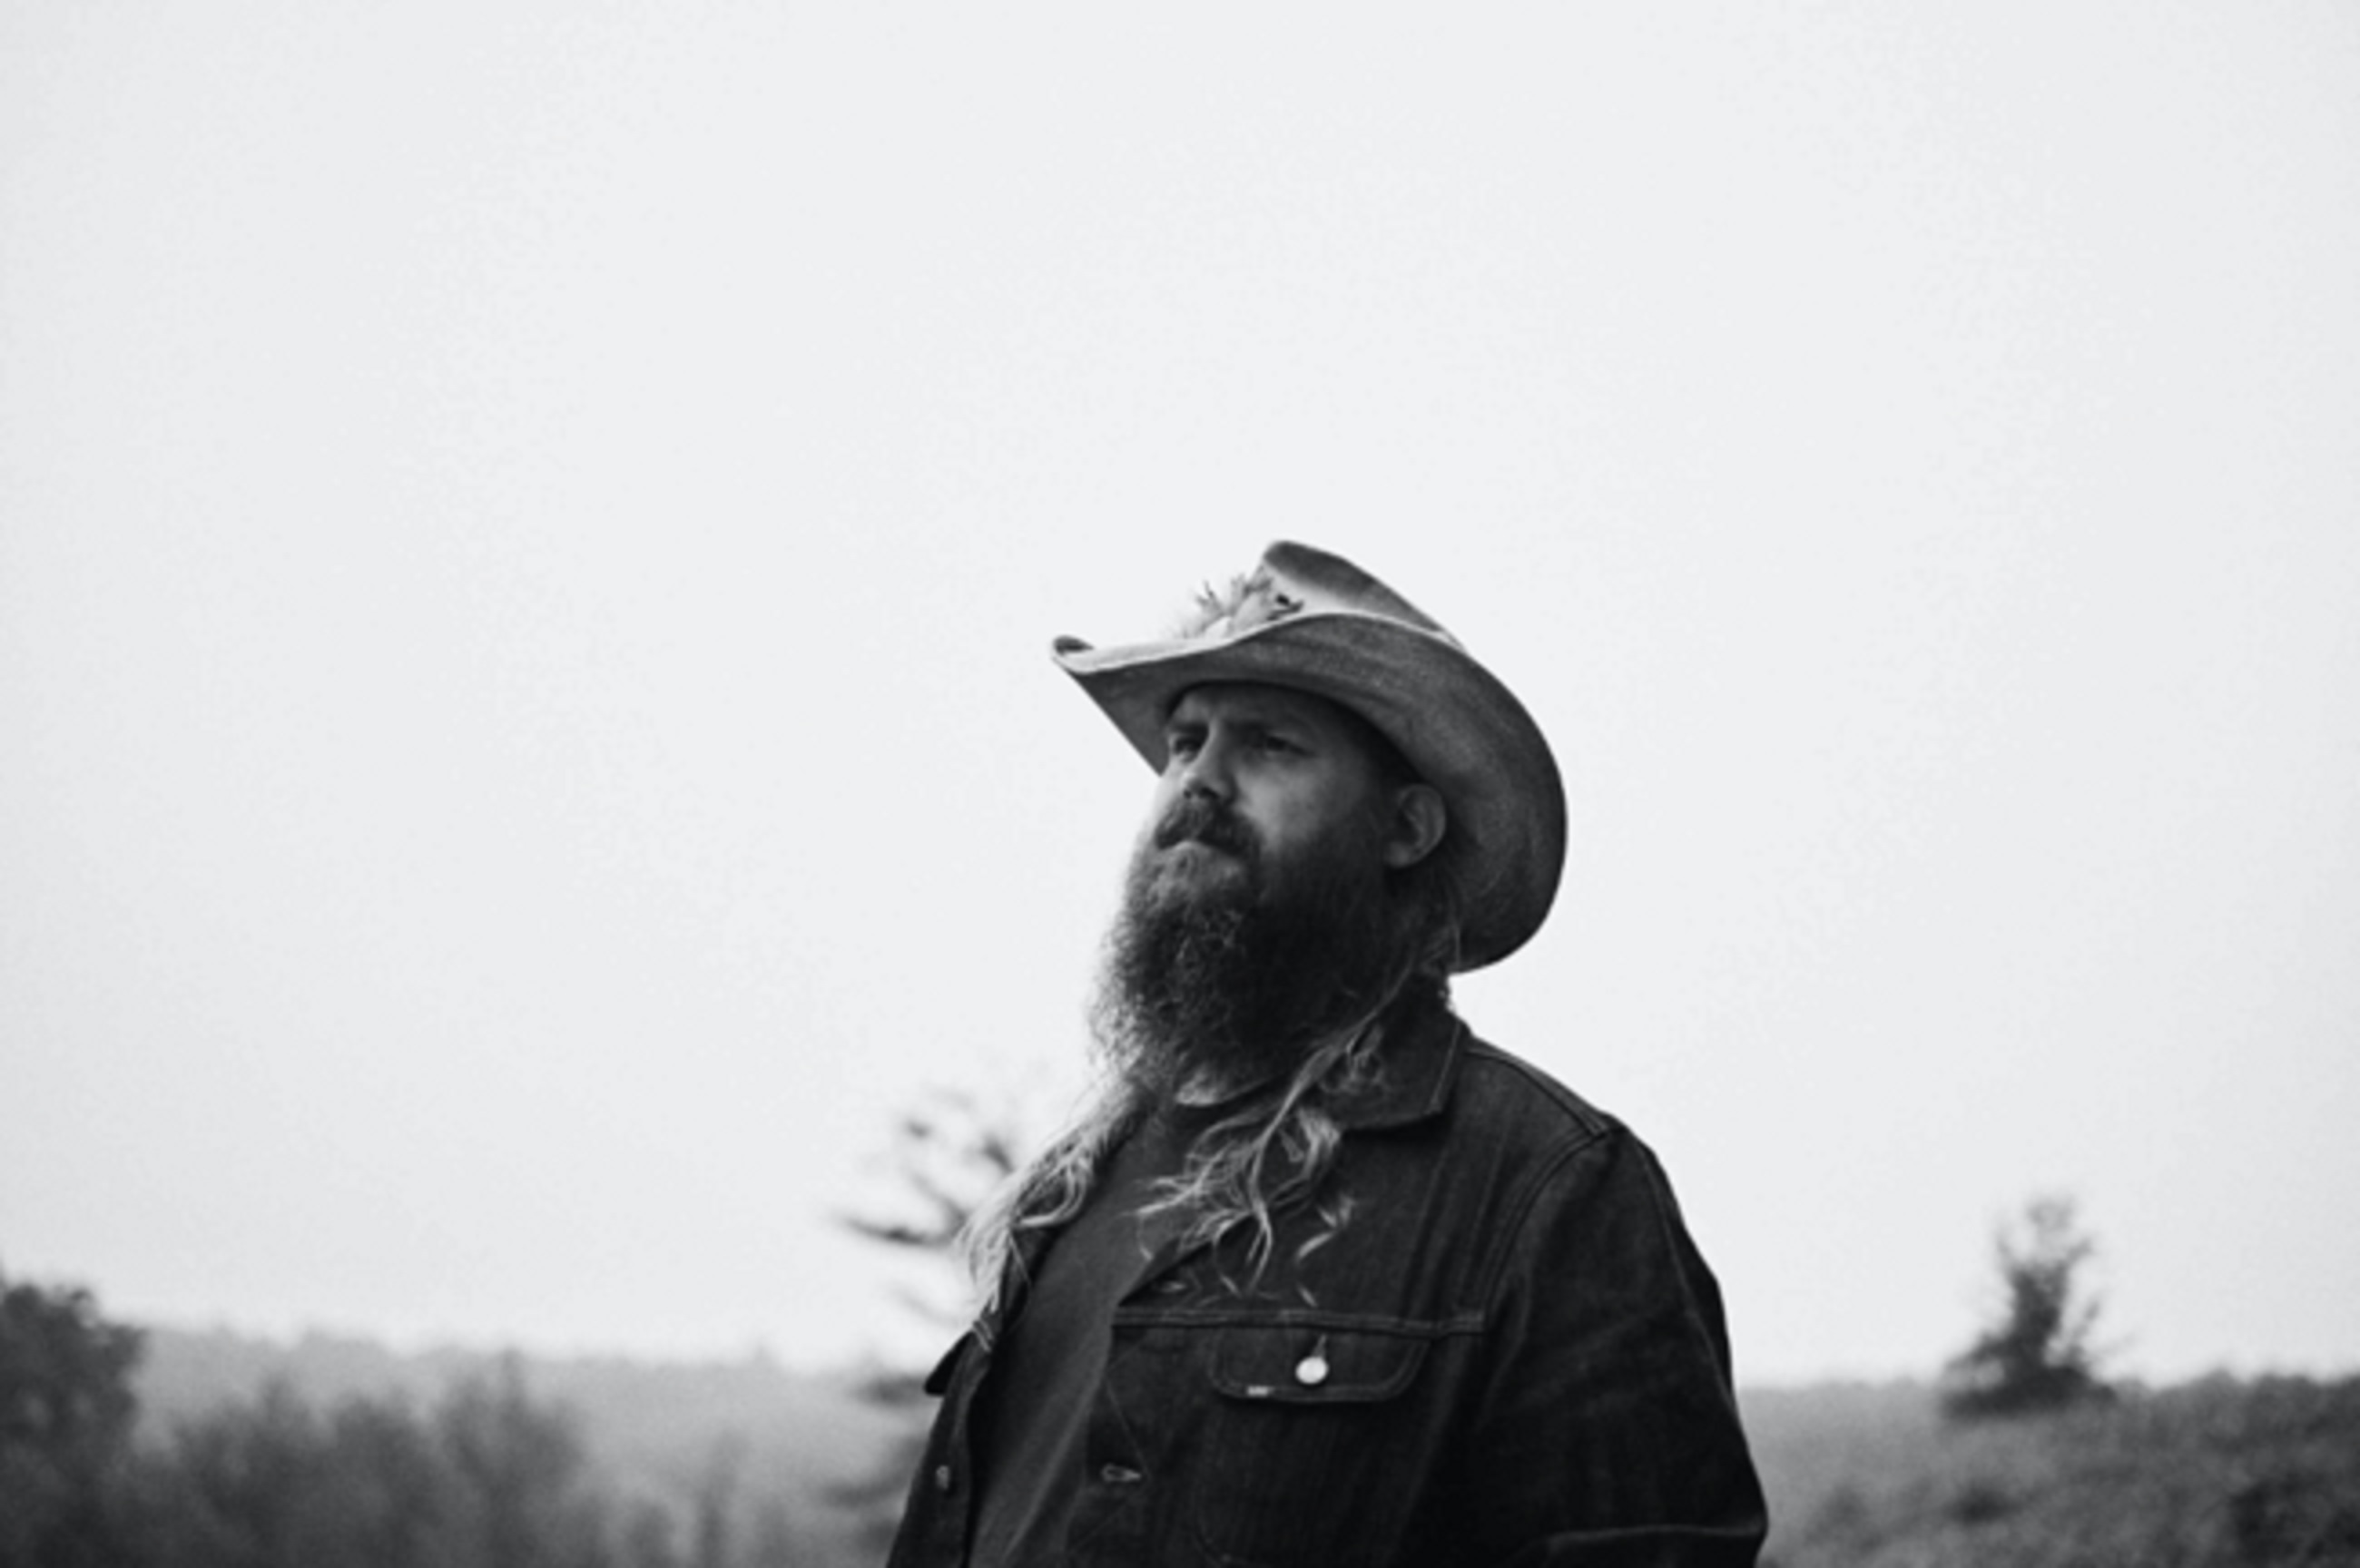 Chris Stapleton’s “Starting Over” 1 at country radio this week, leads